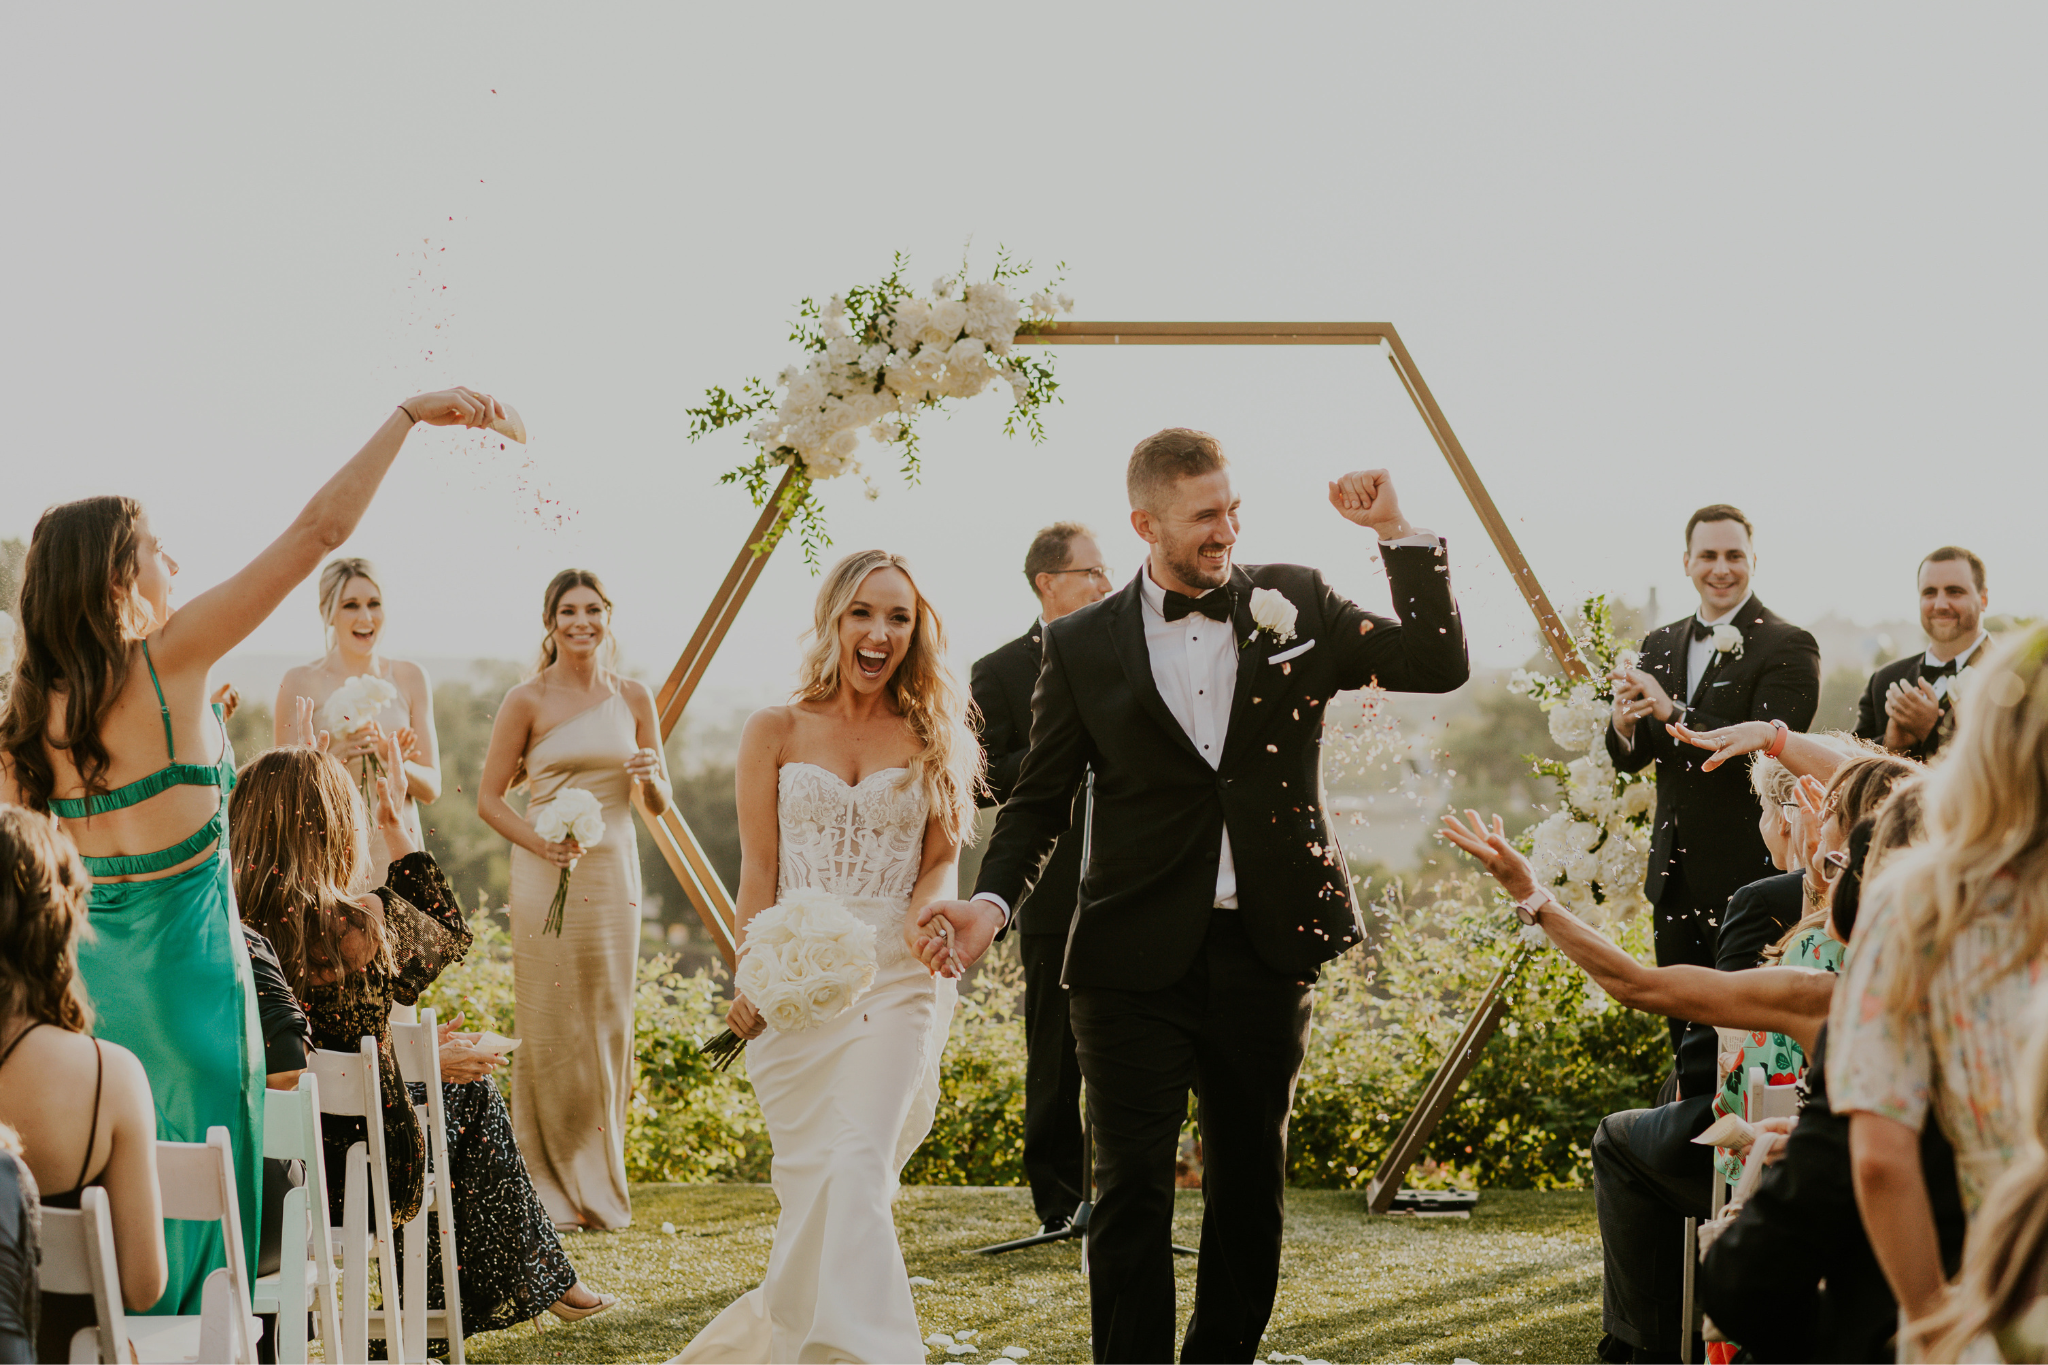 Husband and wide walking down isle after ceremony